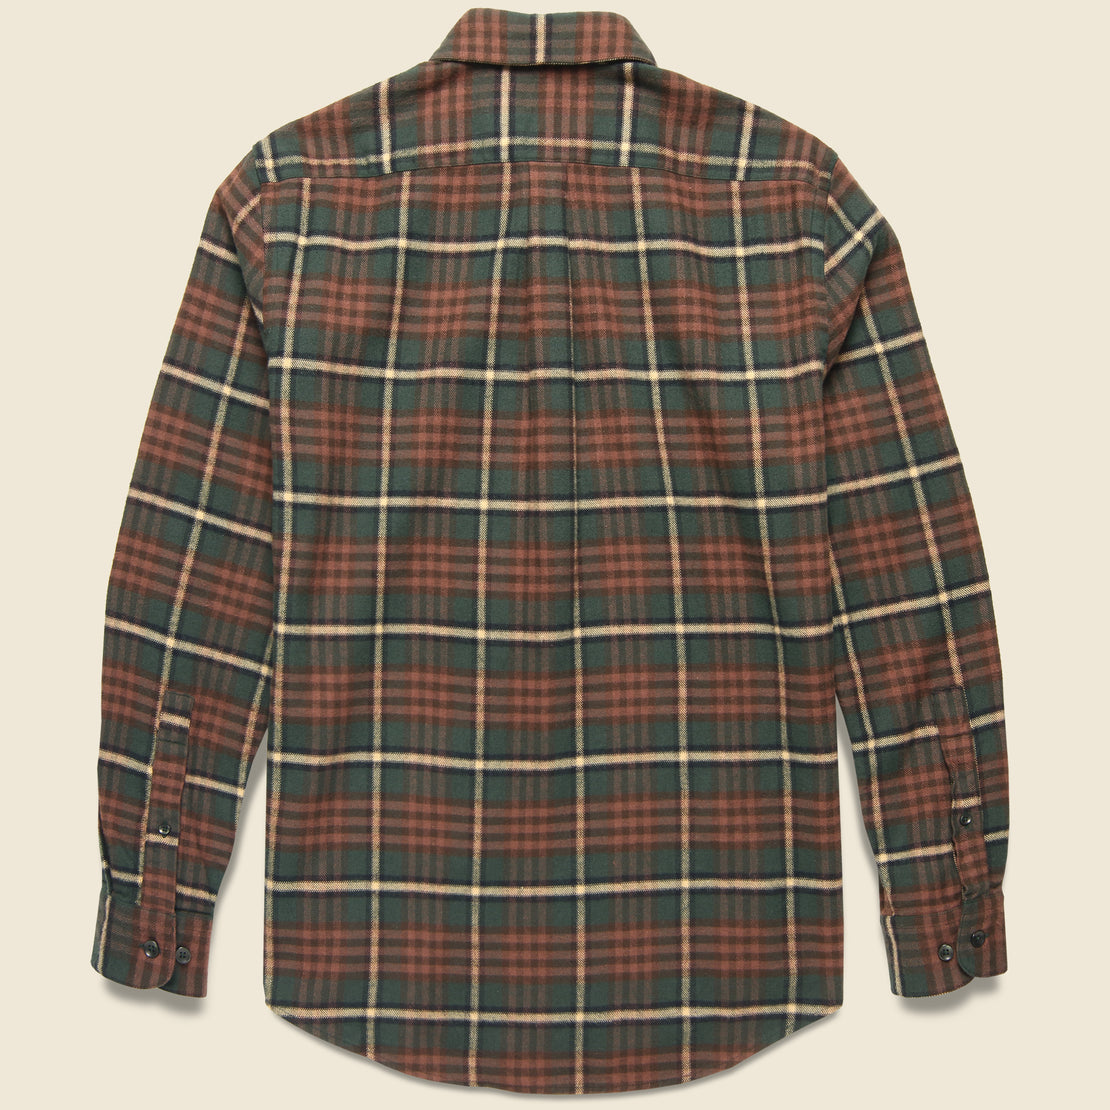 Smog Shirt - Brown/Green - Portuguese Flannel - STAG Provisions - Tops - L/S Woven - Plaid